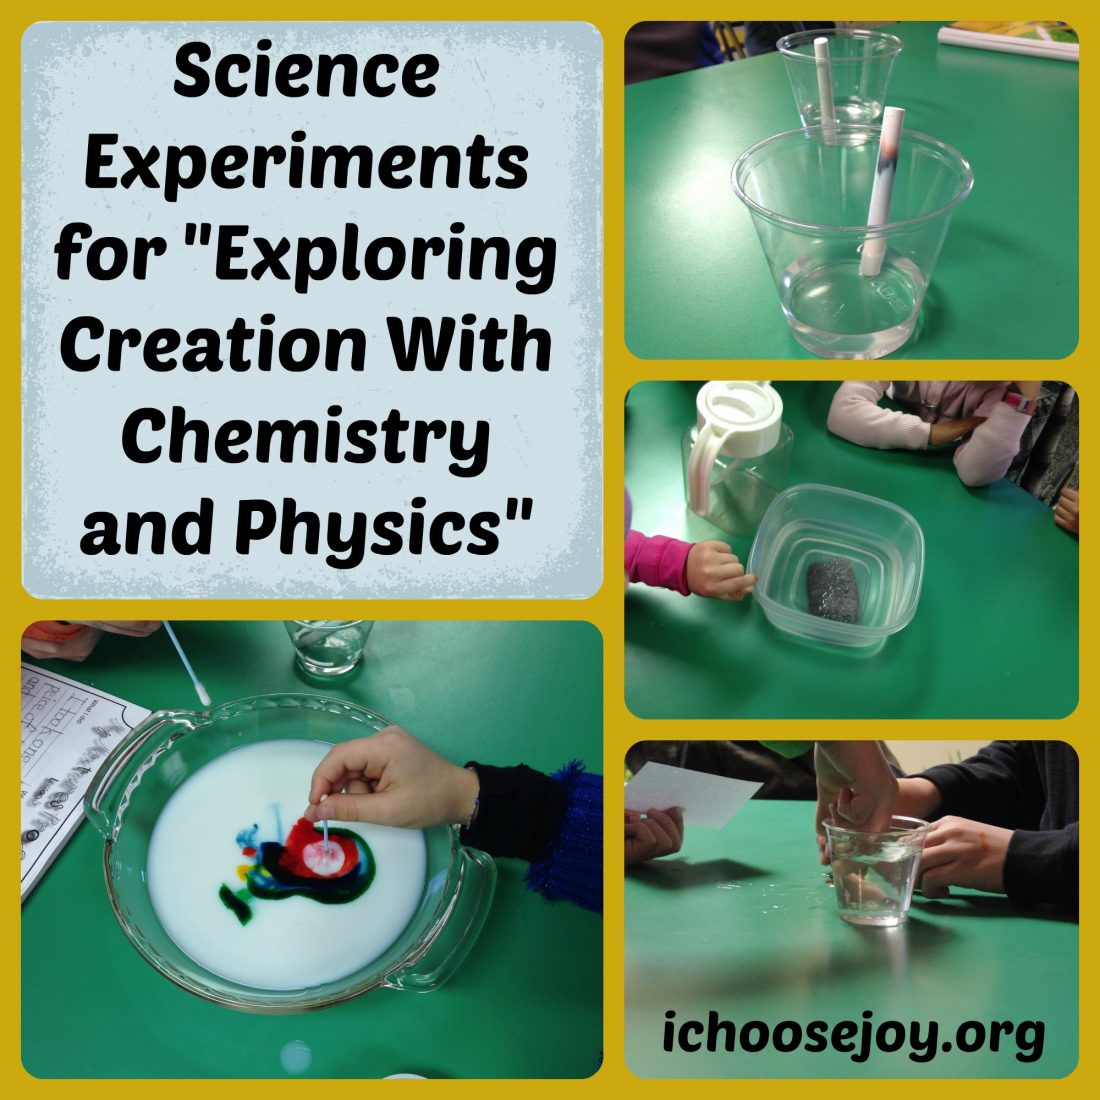 Science Experiments for "Exploring Creation with Chemistry and Physics" for your elementary homeschool, from I Choose Joy!